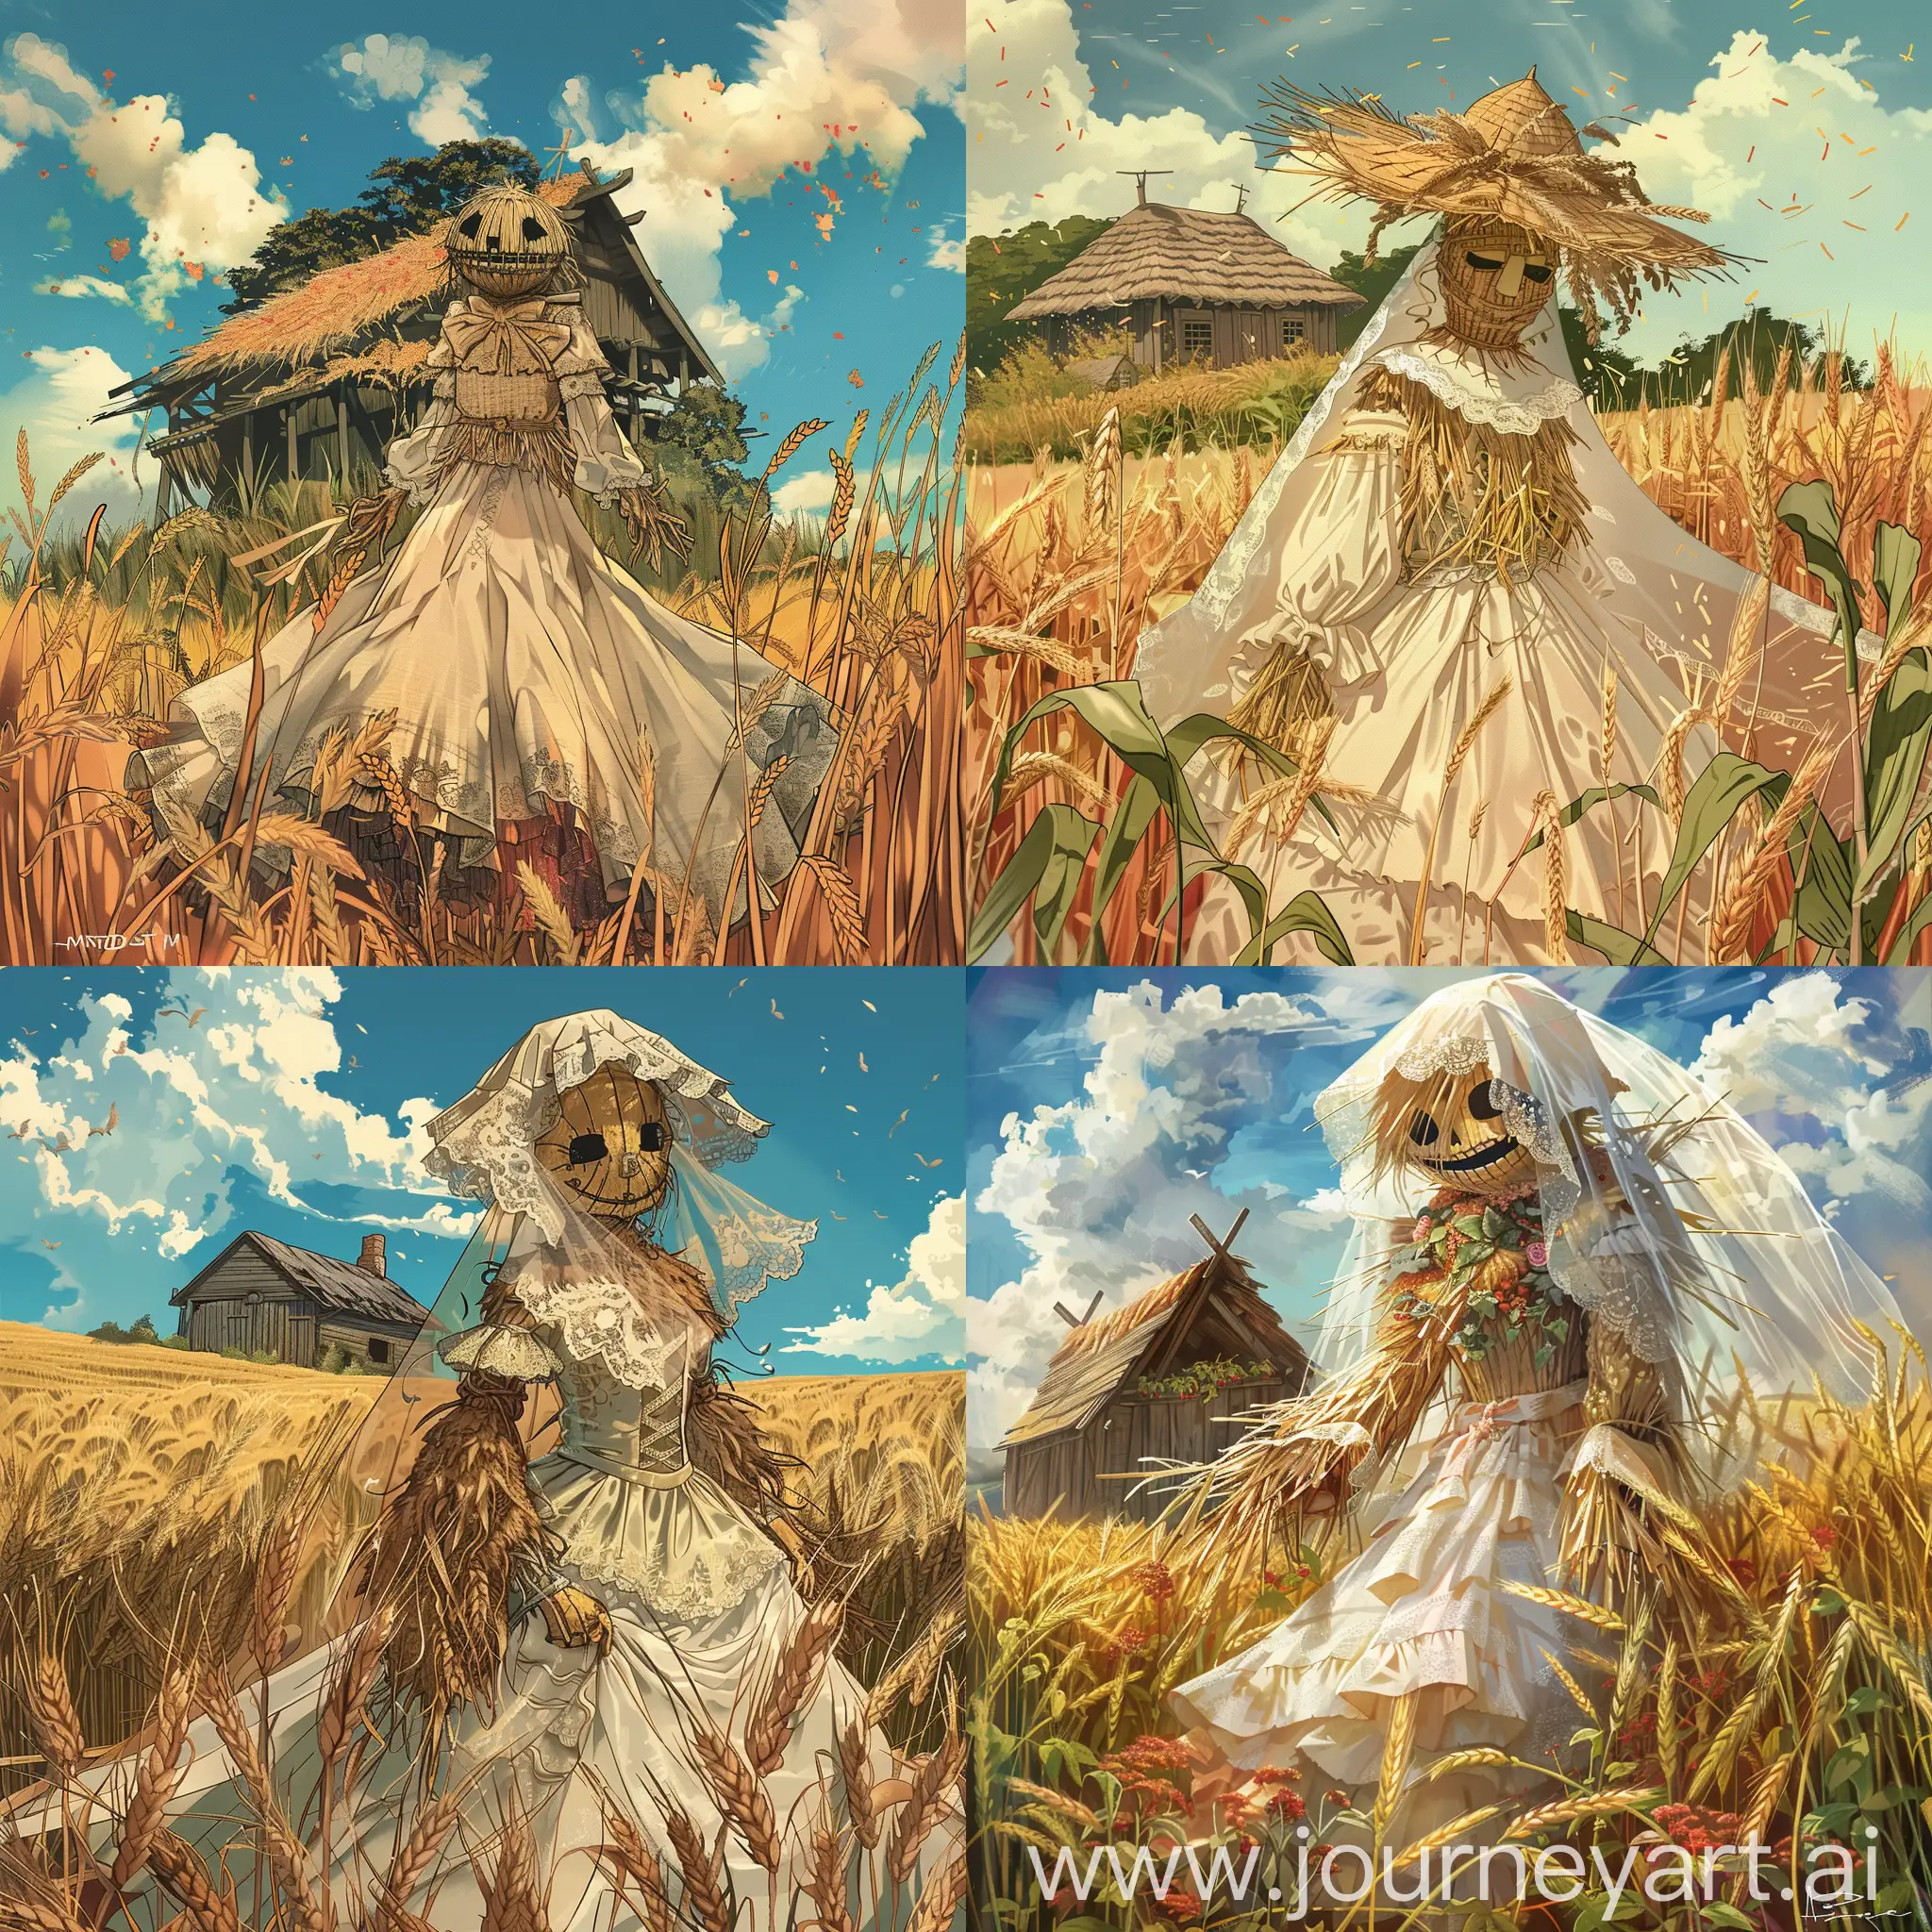 book cover of an story named "the straw bride", a scarecrow dressed in a wedding dress surrounded by a wheat field and with a hut behind, digital art, comic art